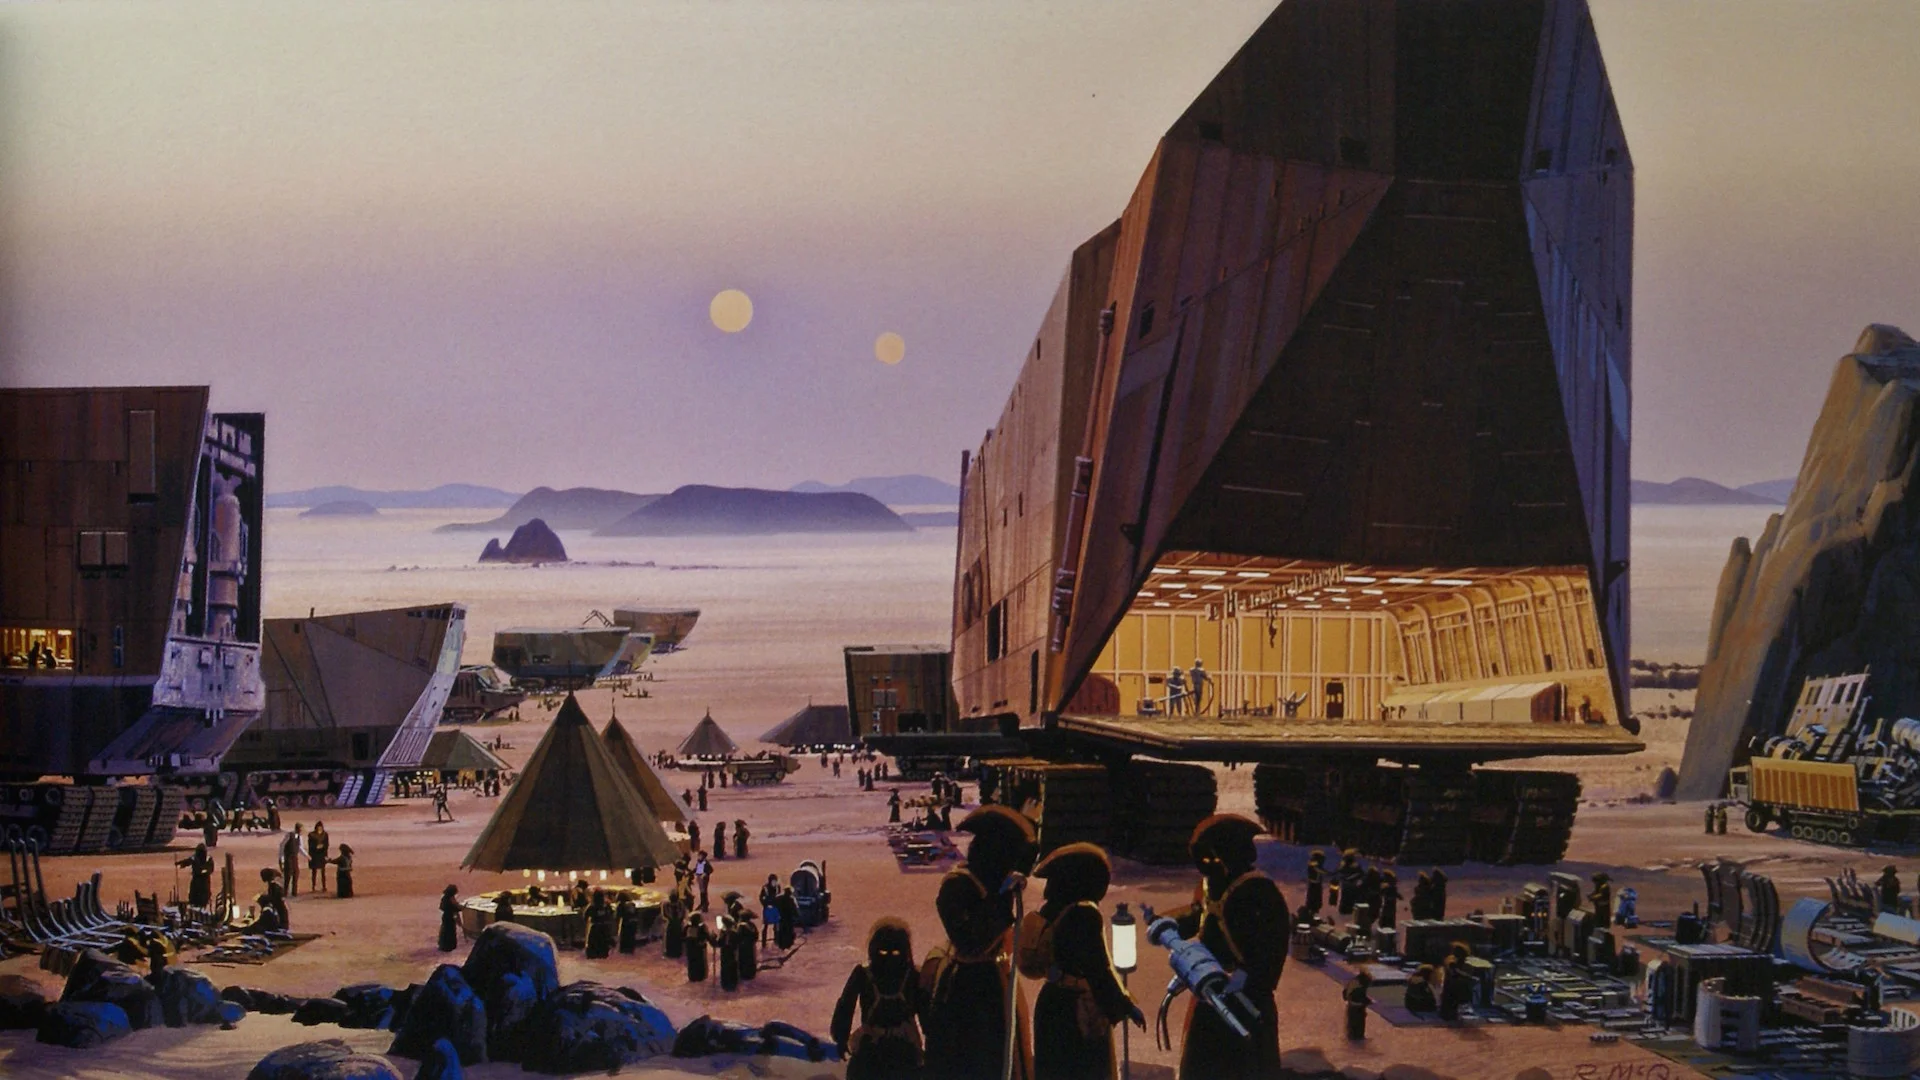 Some of my favourite Ralph McQuarrie Star Wars concept art wallpapers